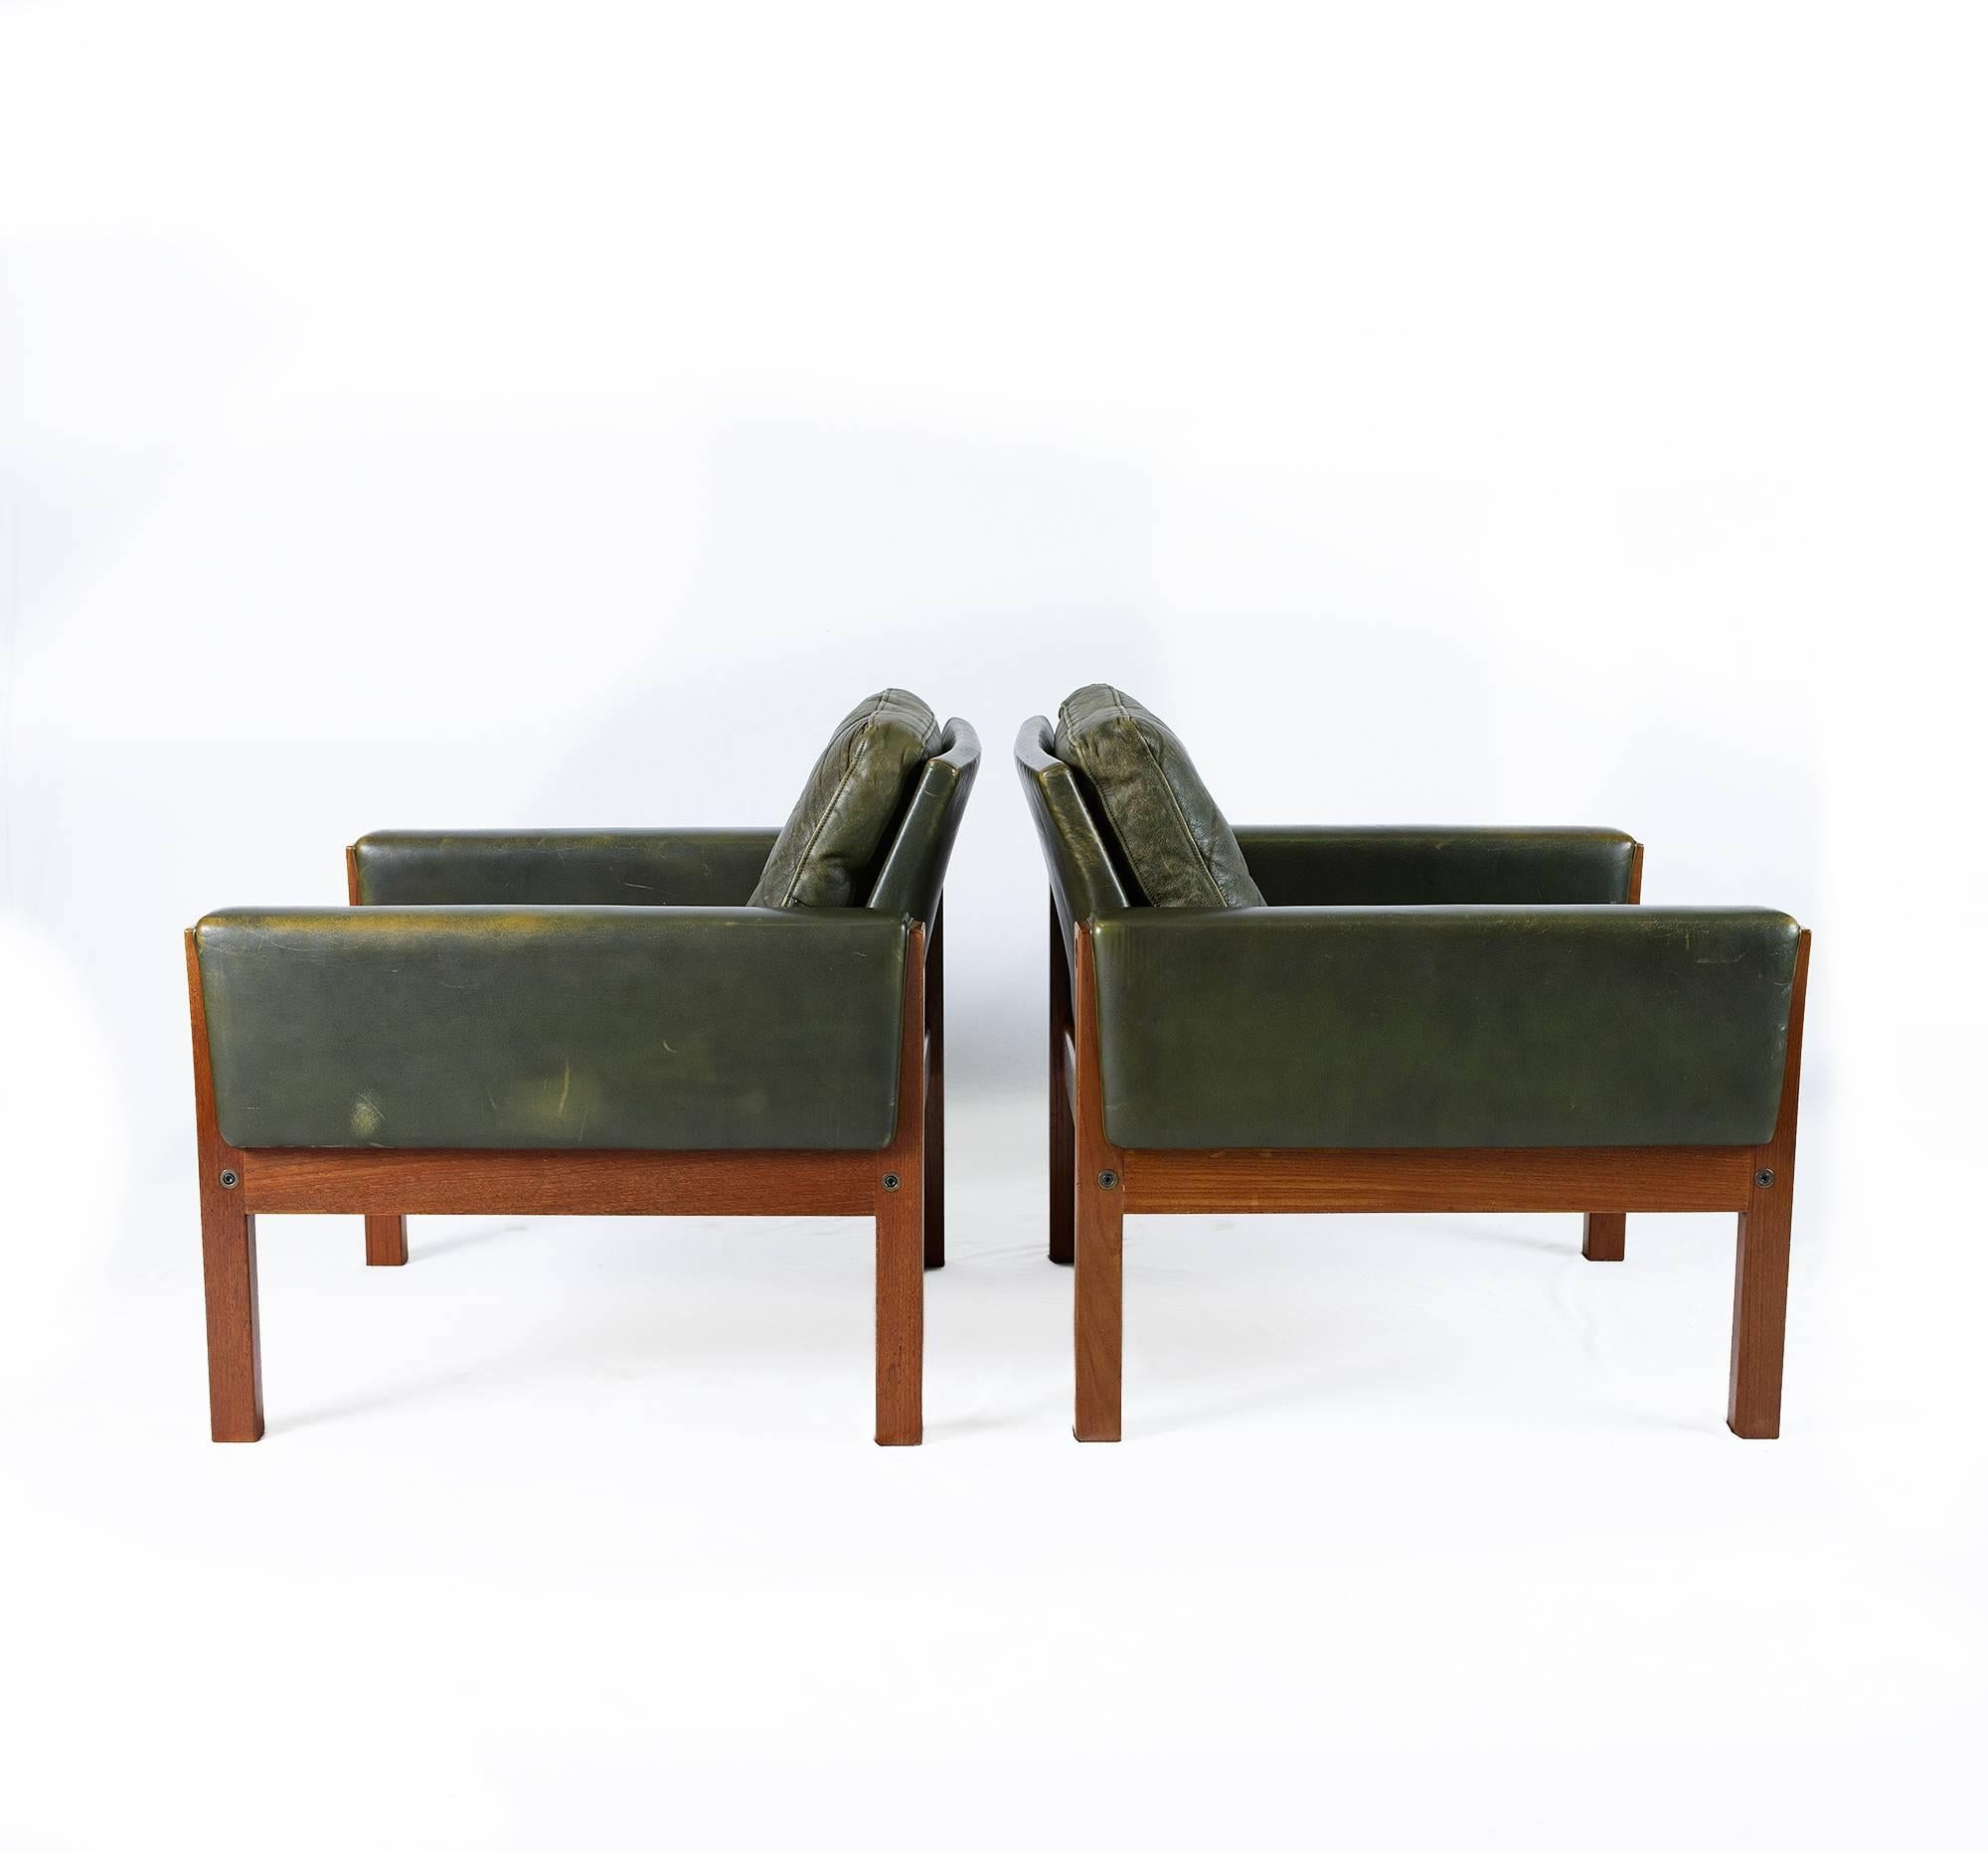 Pair of Hans Wegner AP-62 lounge chairs designed in 1960 and produced by AP Stolen.